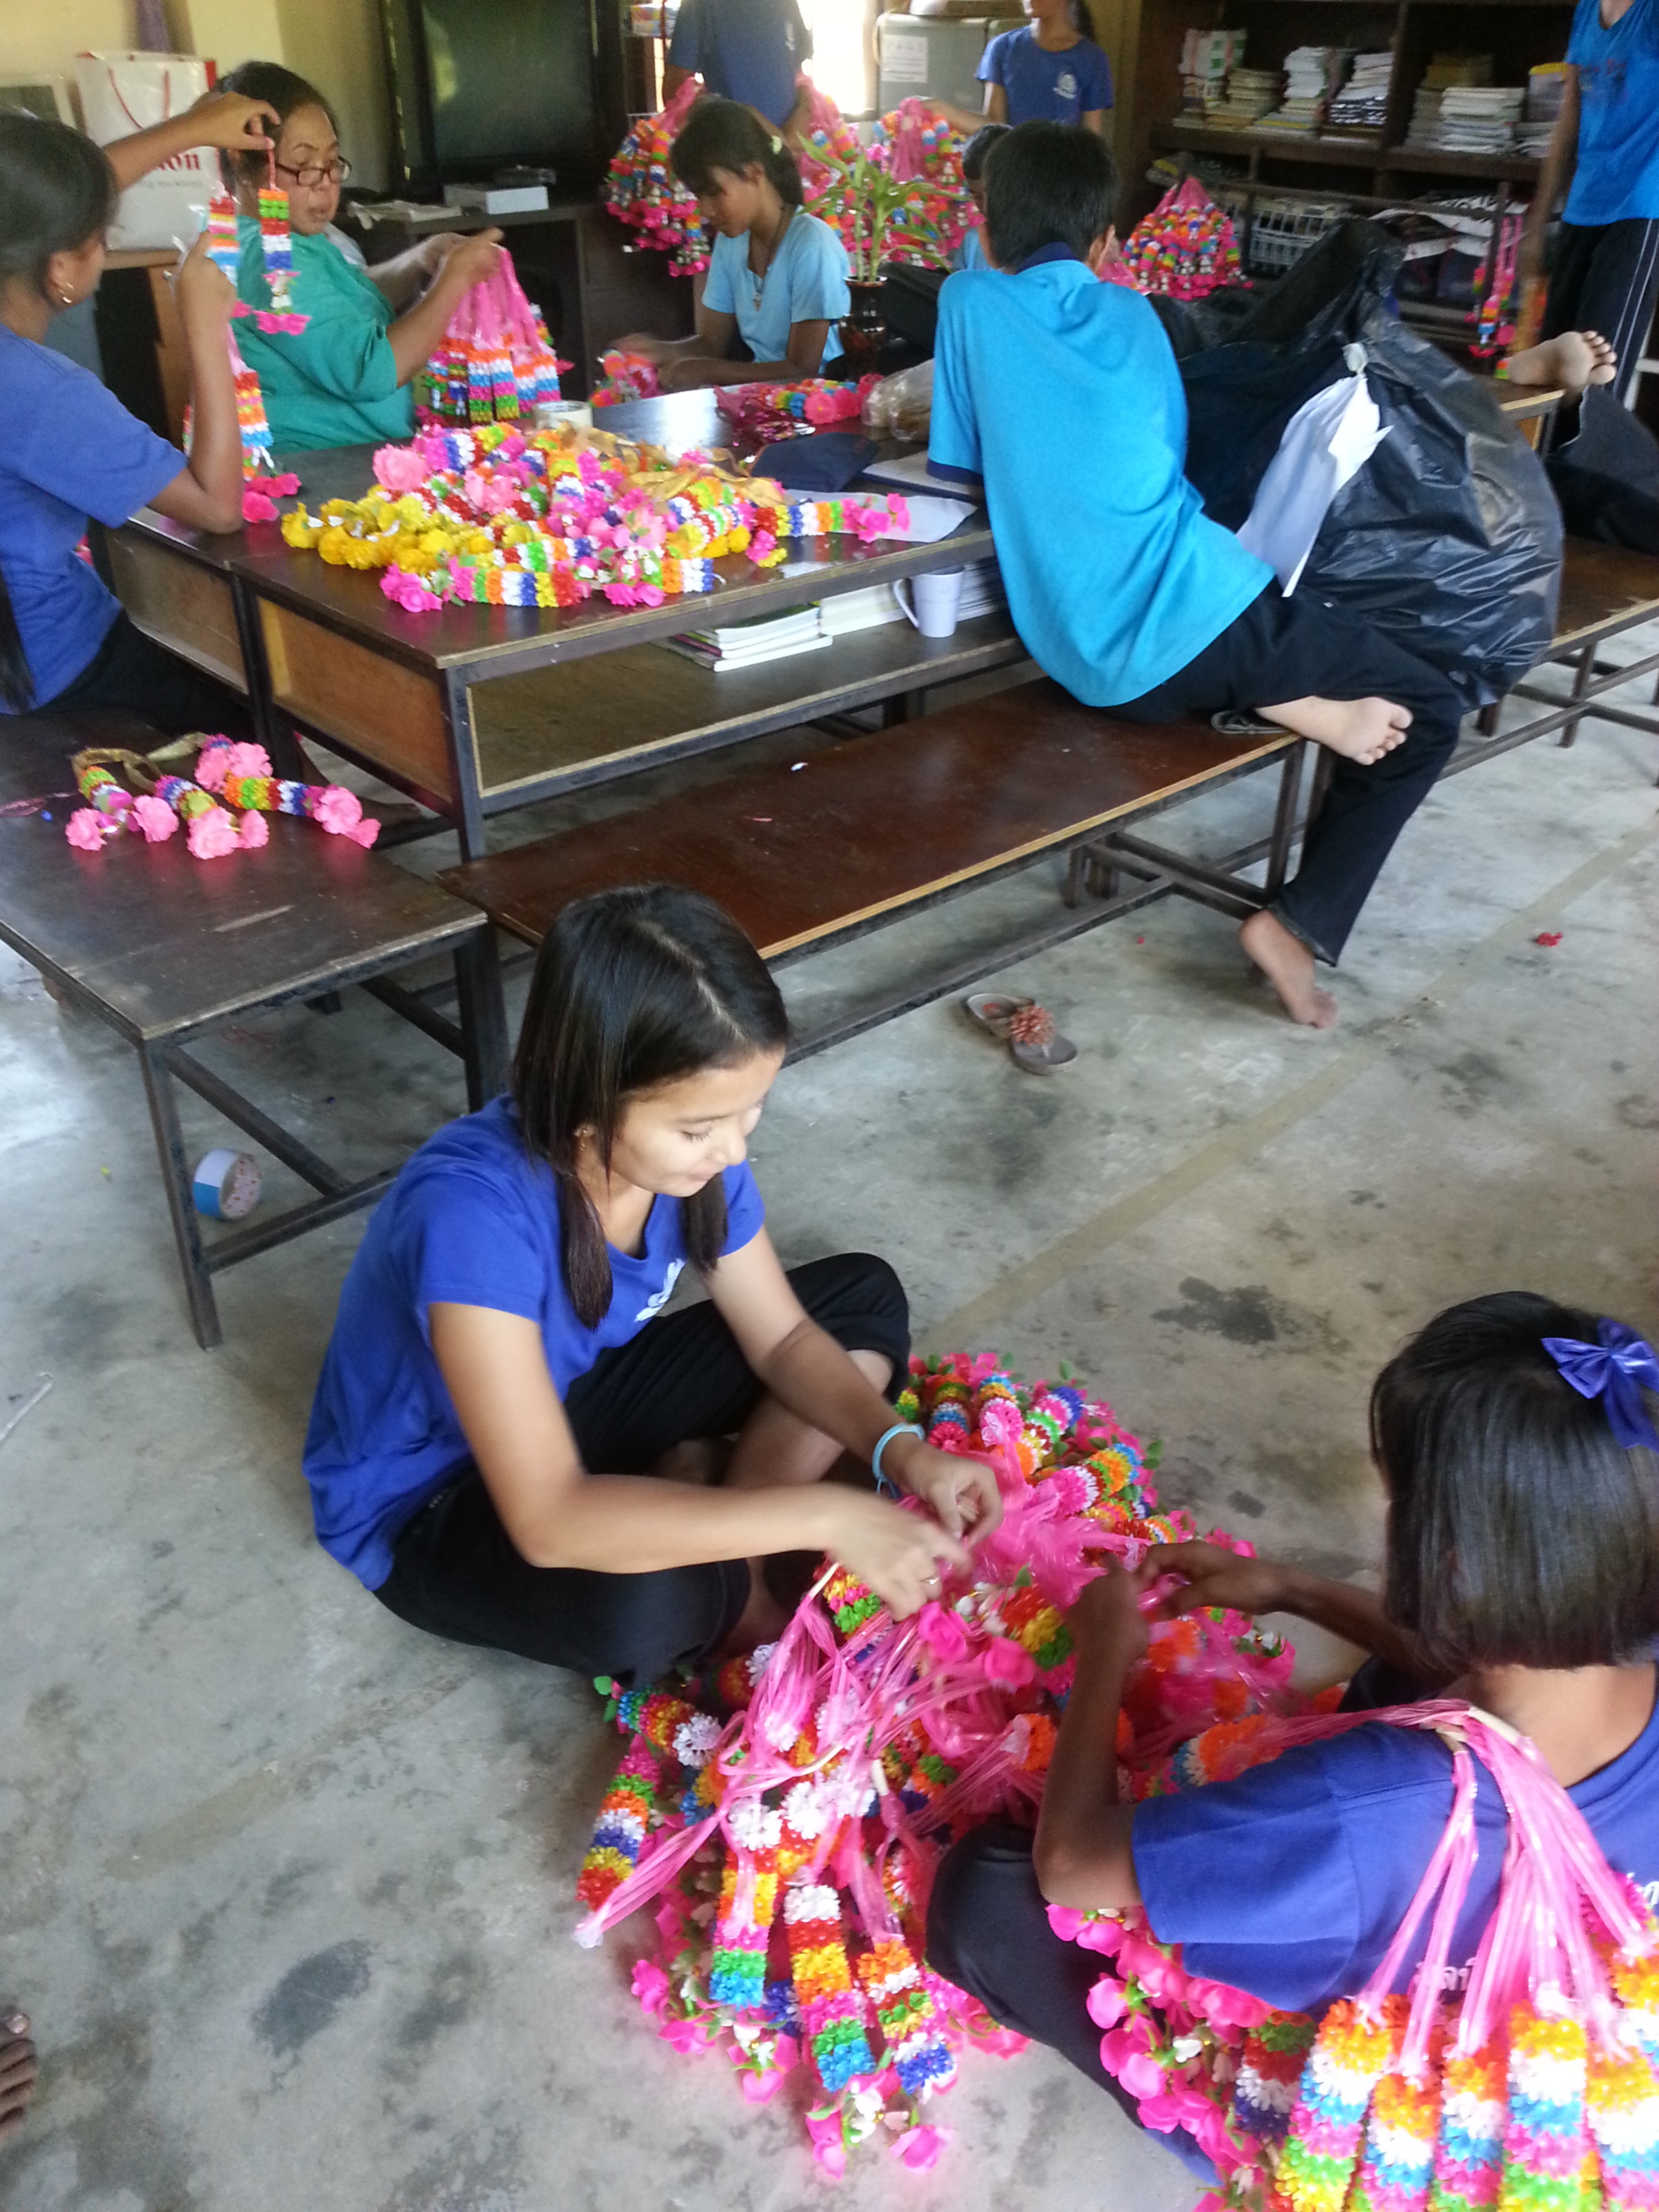 The day after the beauty pageant: students are assigned to detangle all of the flower garland thingy ma jigs.